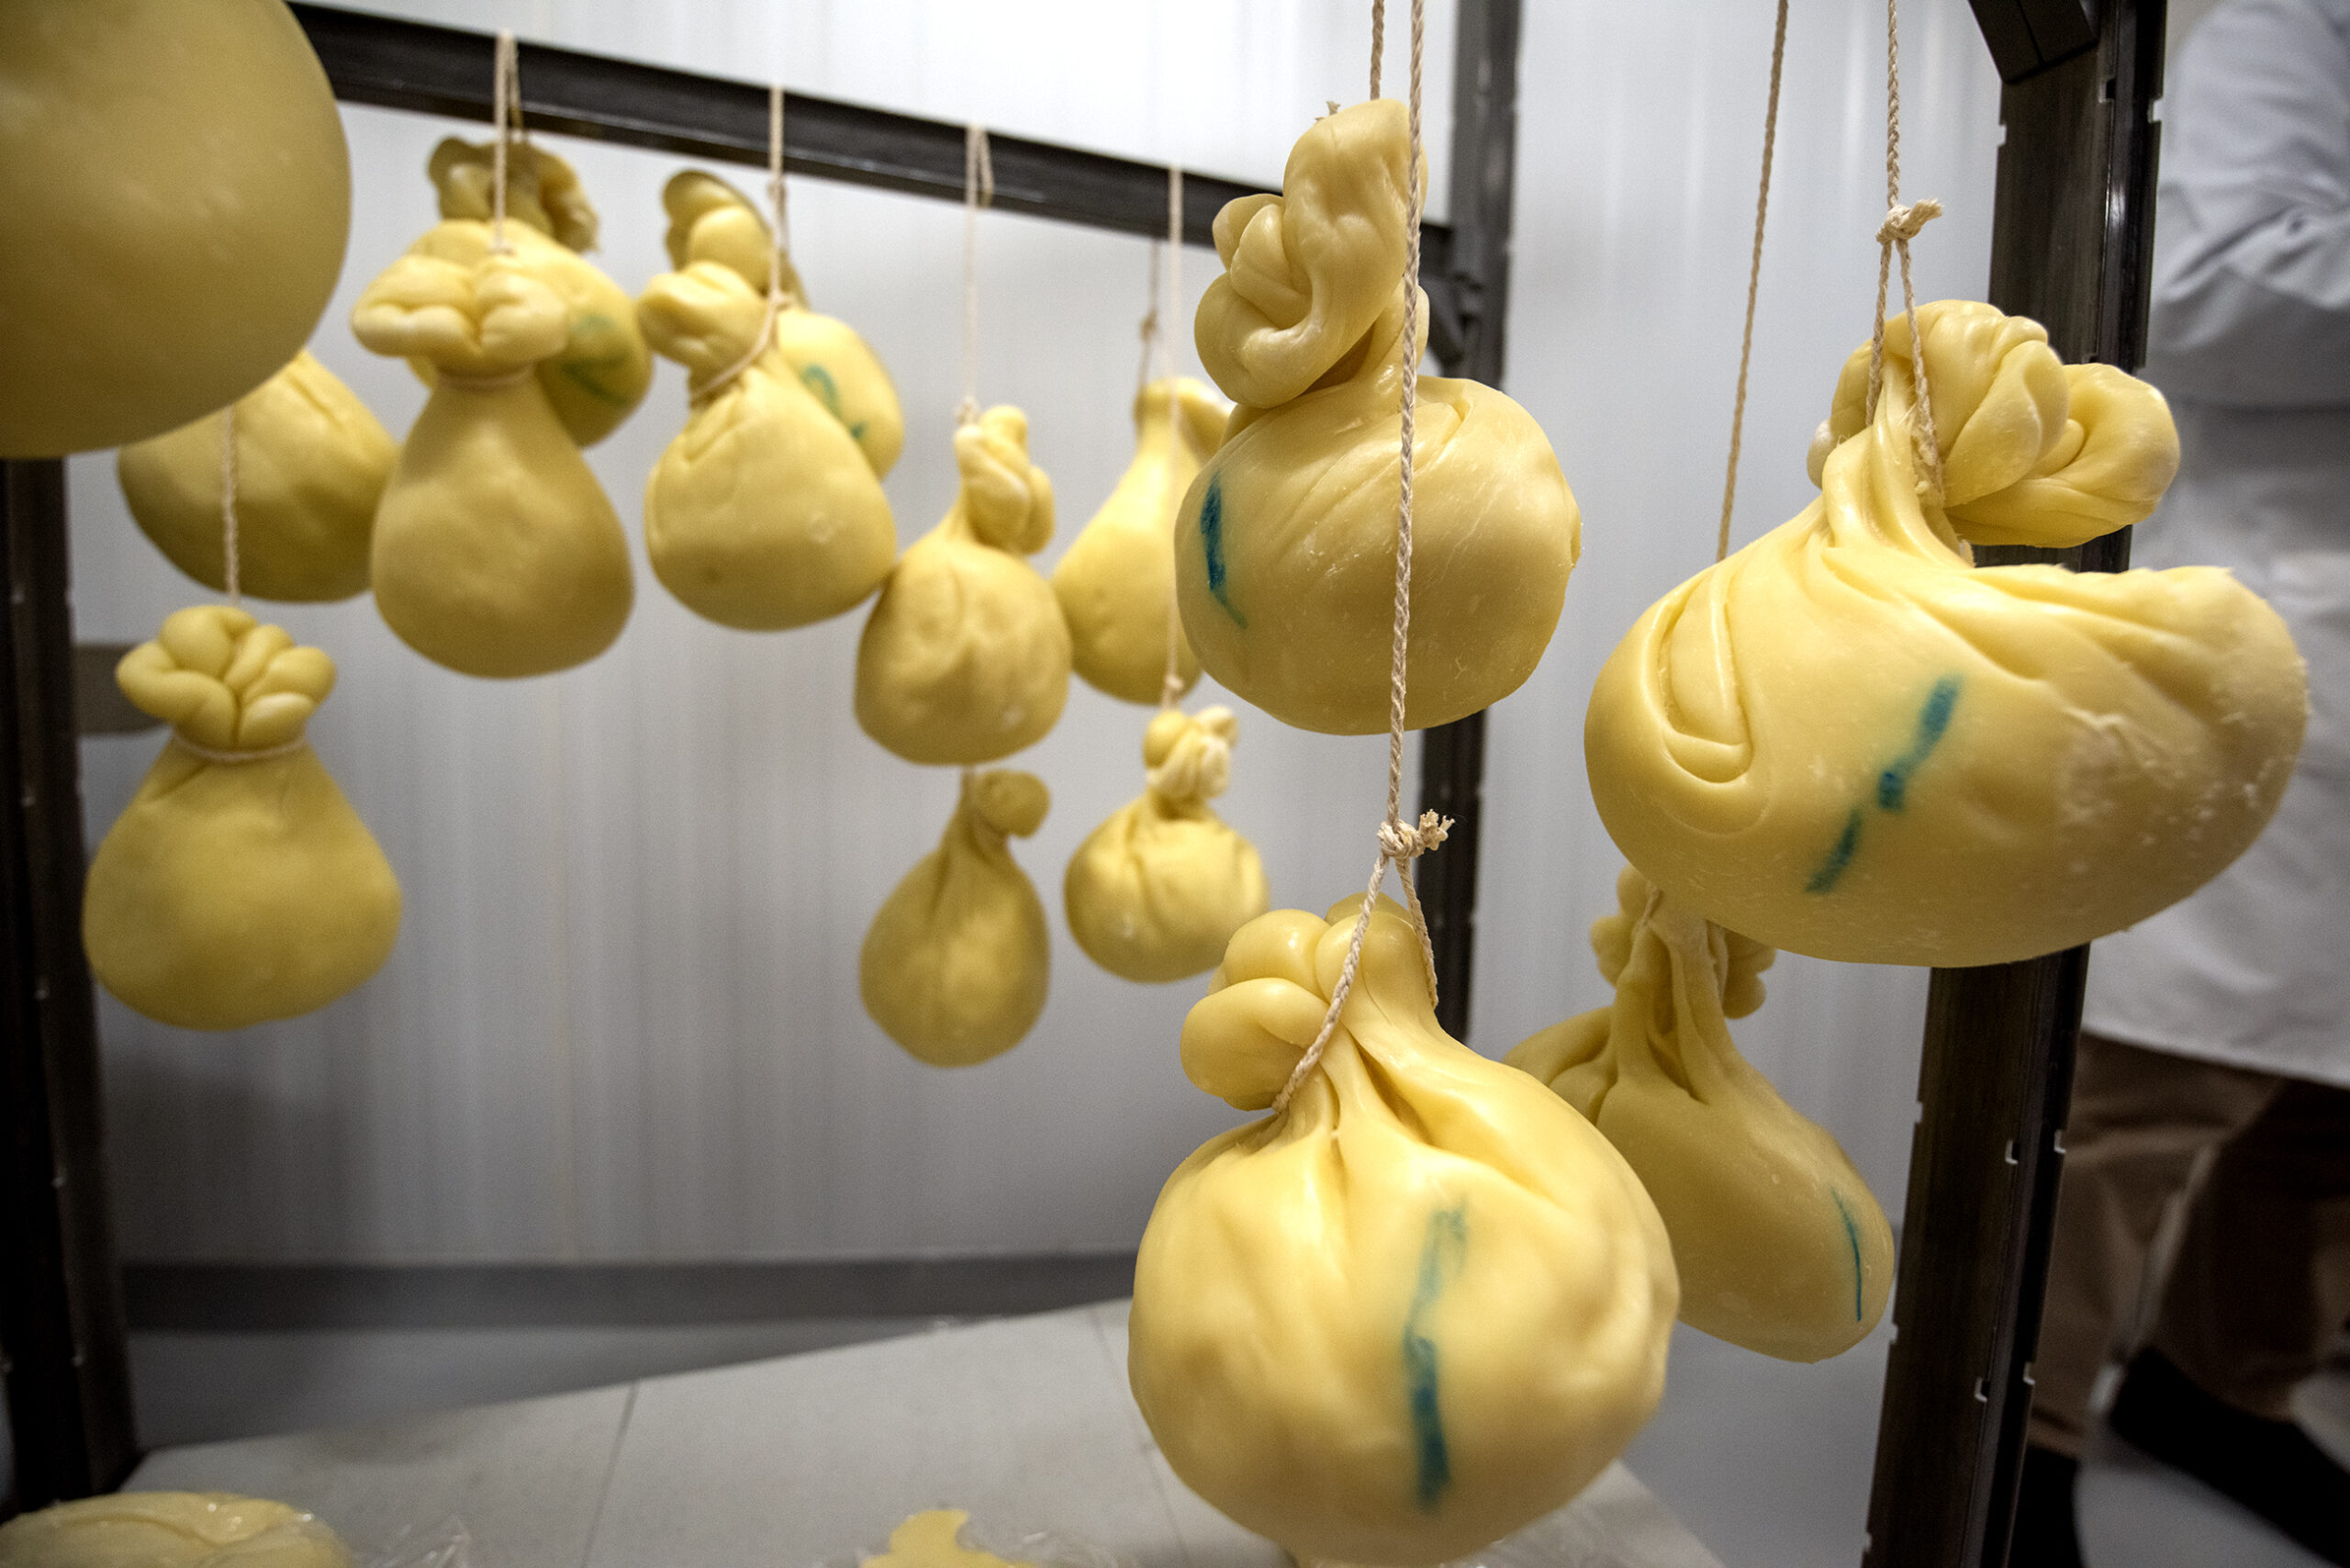 Cheese is hung from string in a lab.